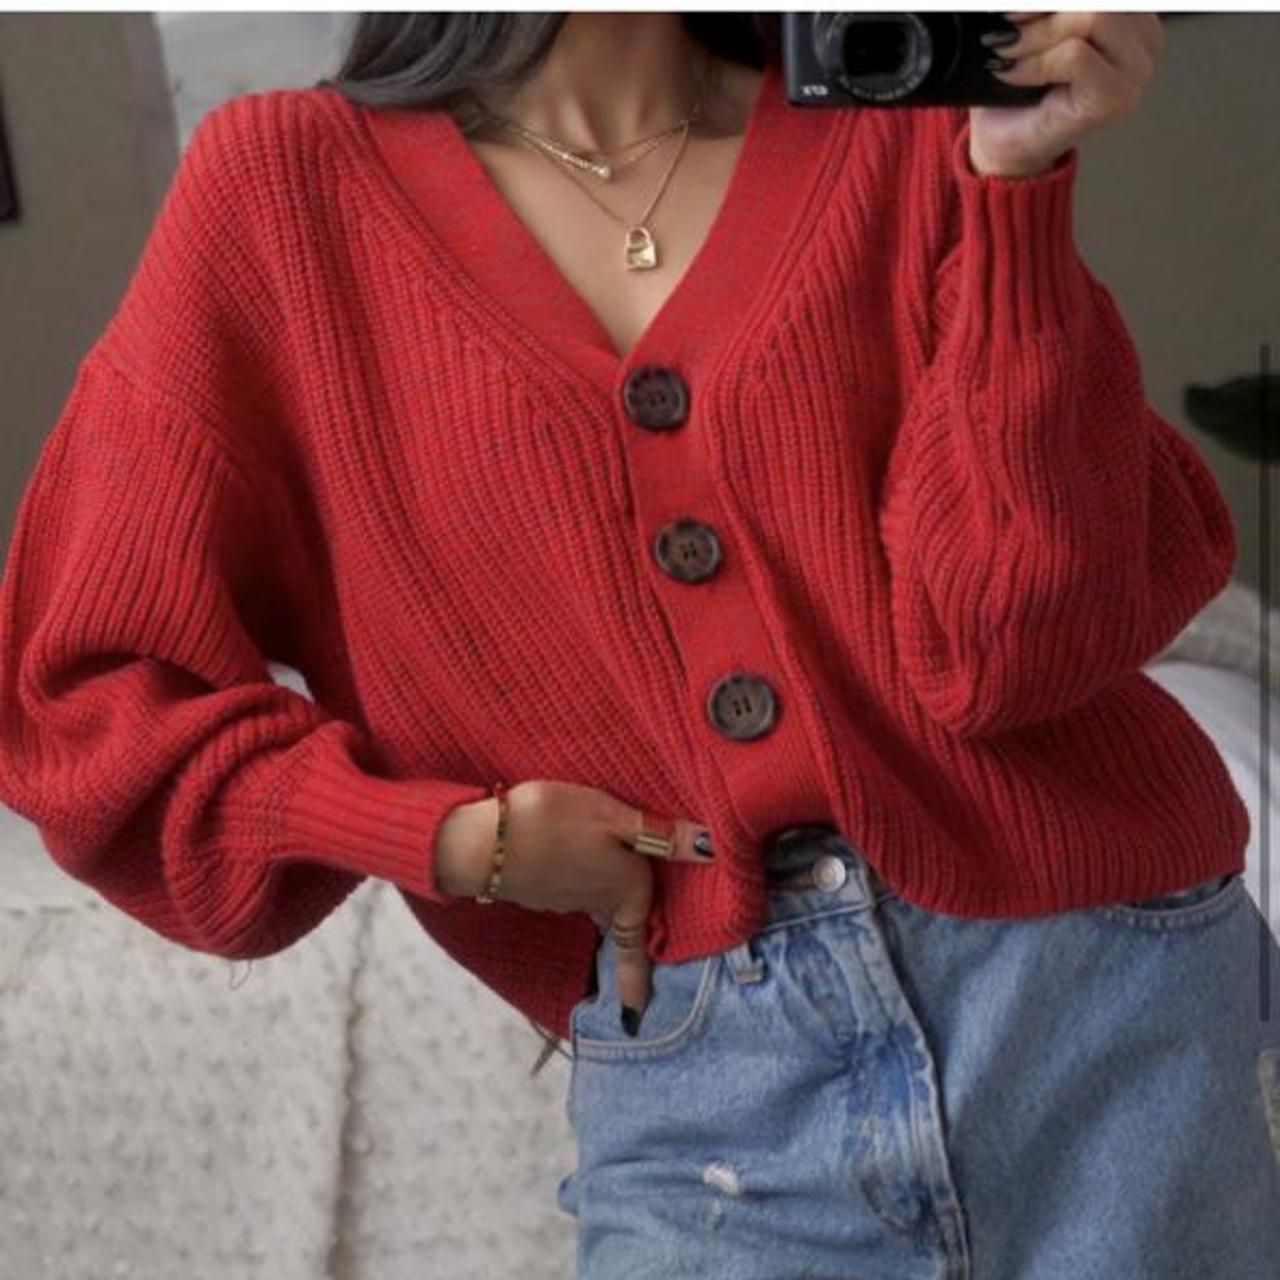 Urban Outfitters Women's Red Cardigan (2)